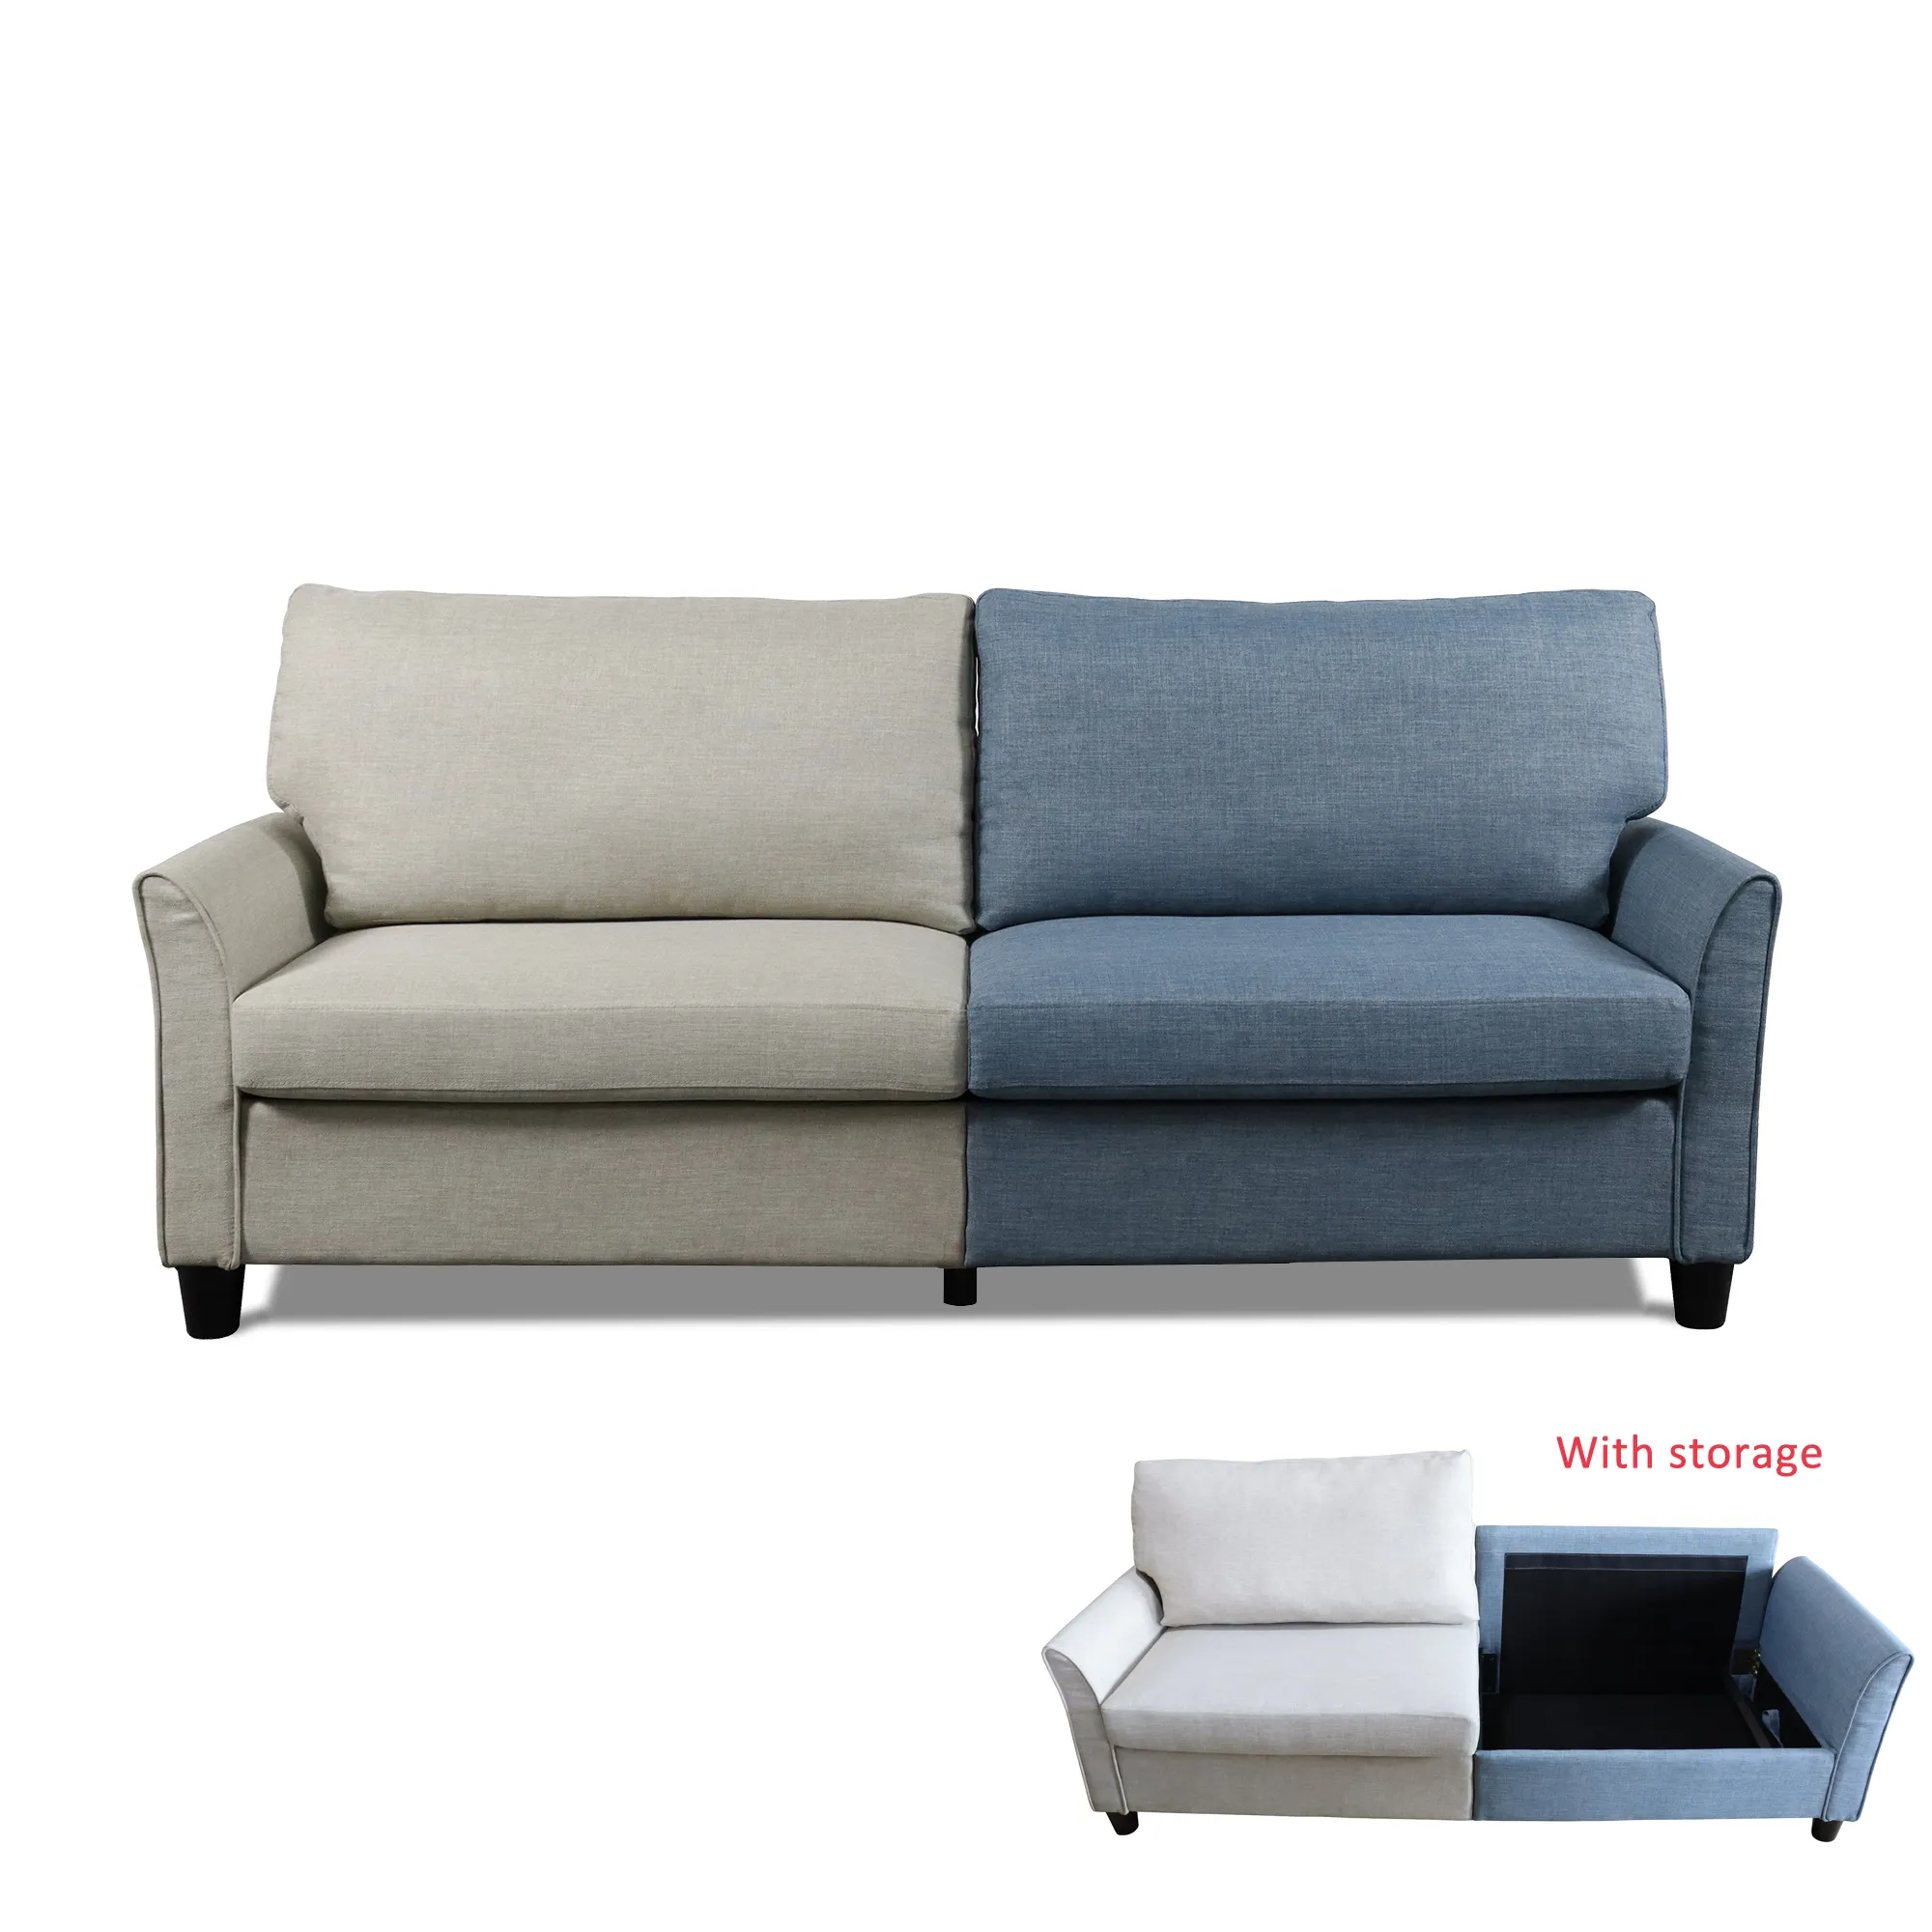 Living room furniture three seater linen fabric sofa couch with storage mail packing sofa